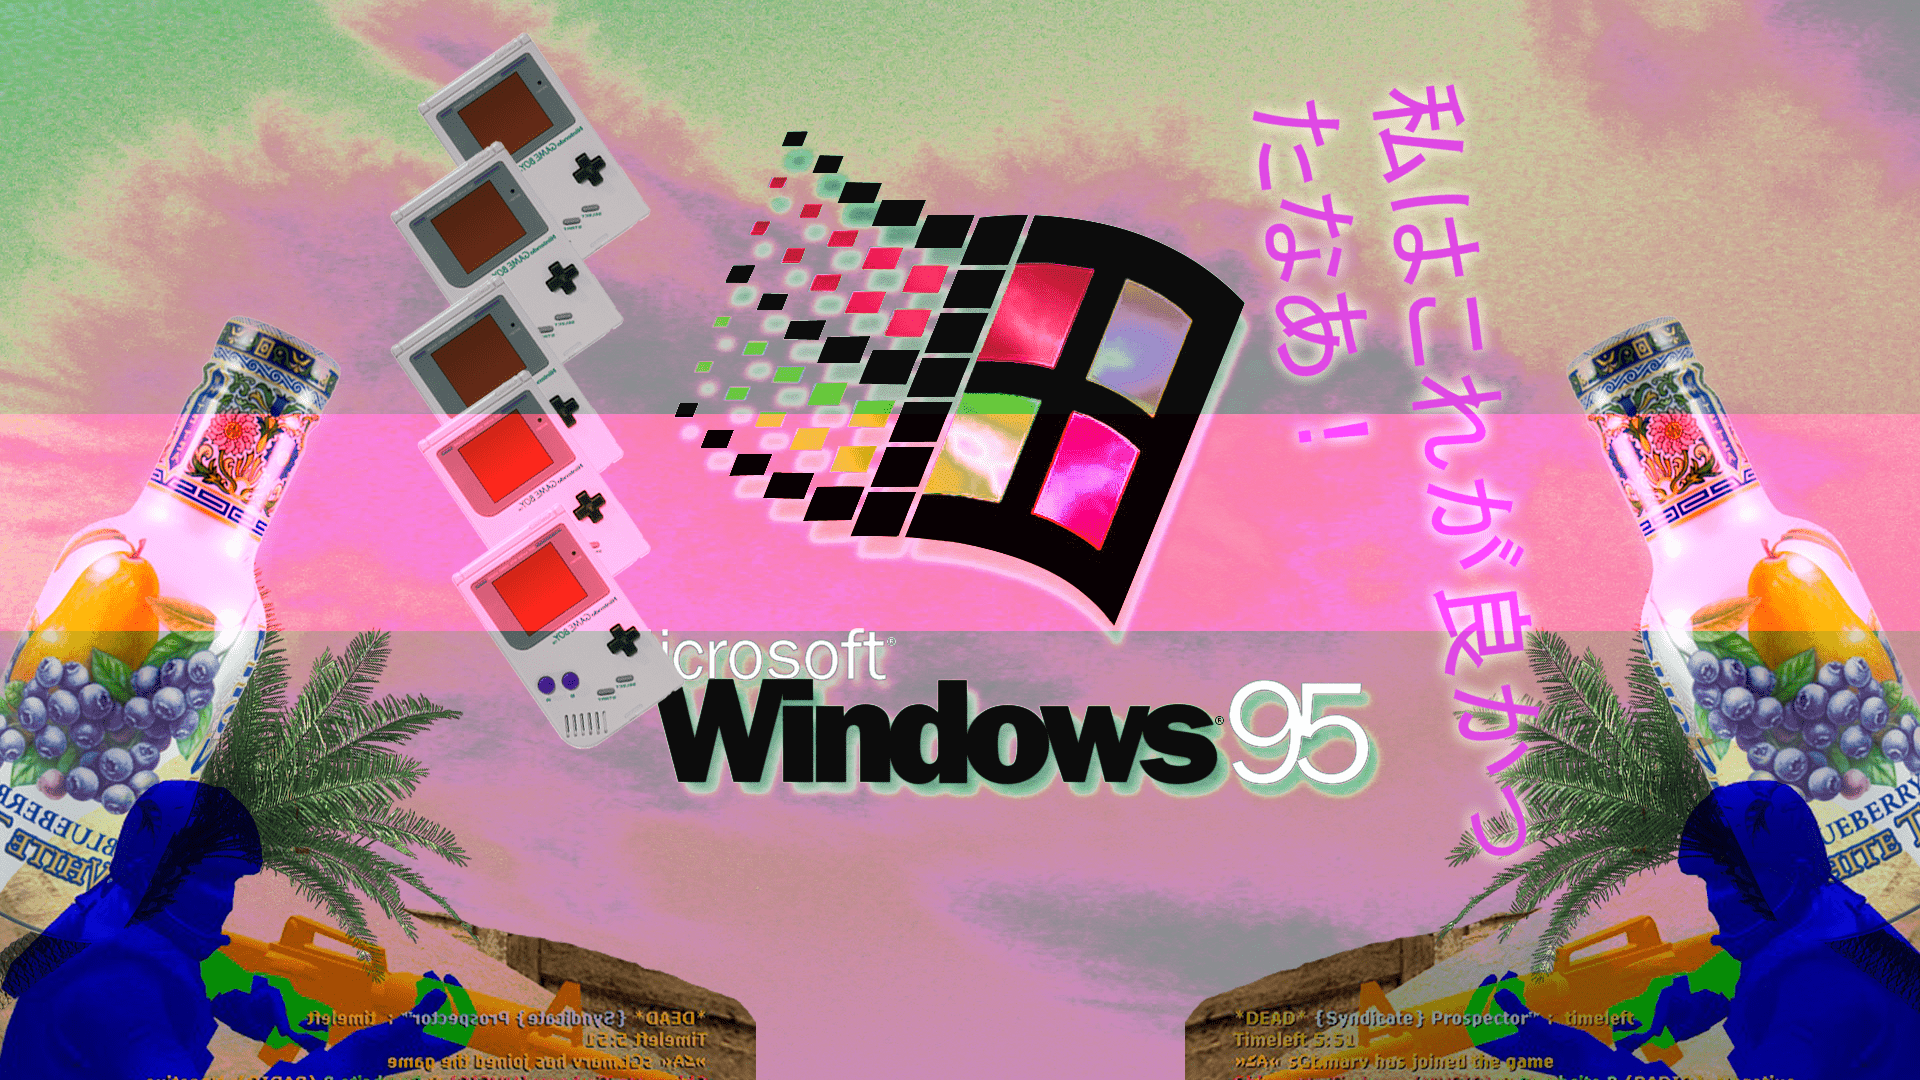 A Windows 95 wallpaper featuring a beach scene, a Game Boy, and the logo for the operating system. - Windows 95, vaporwave